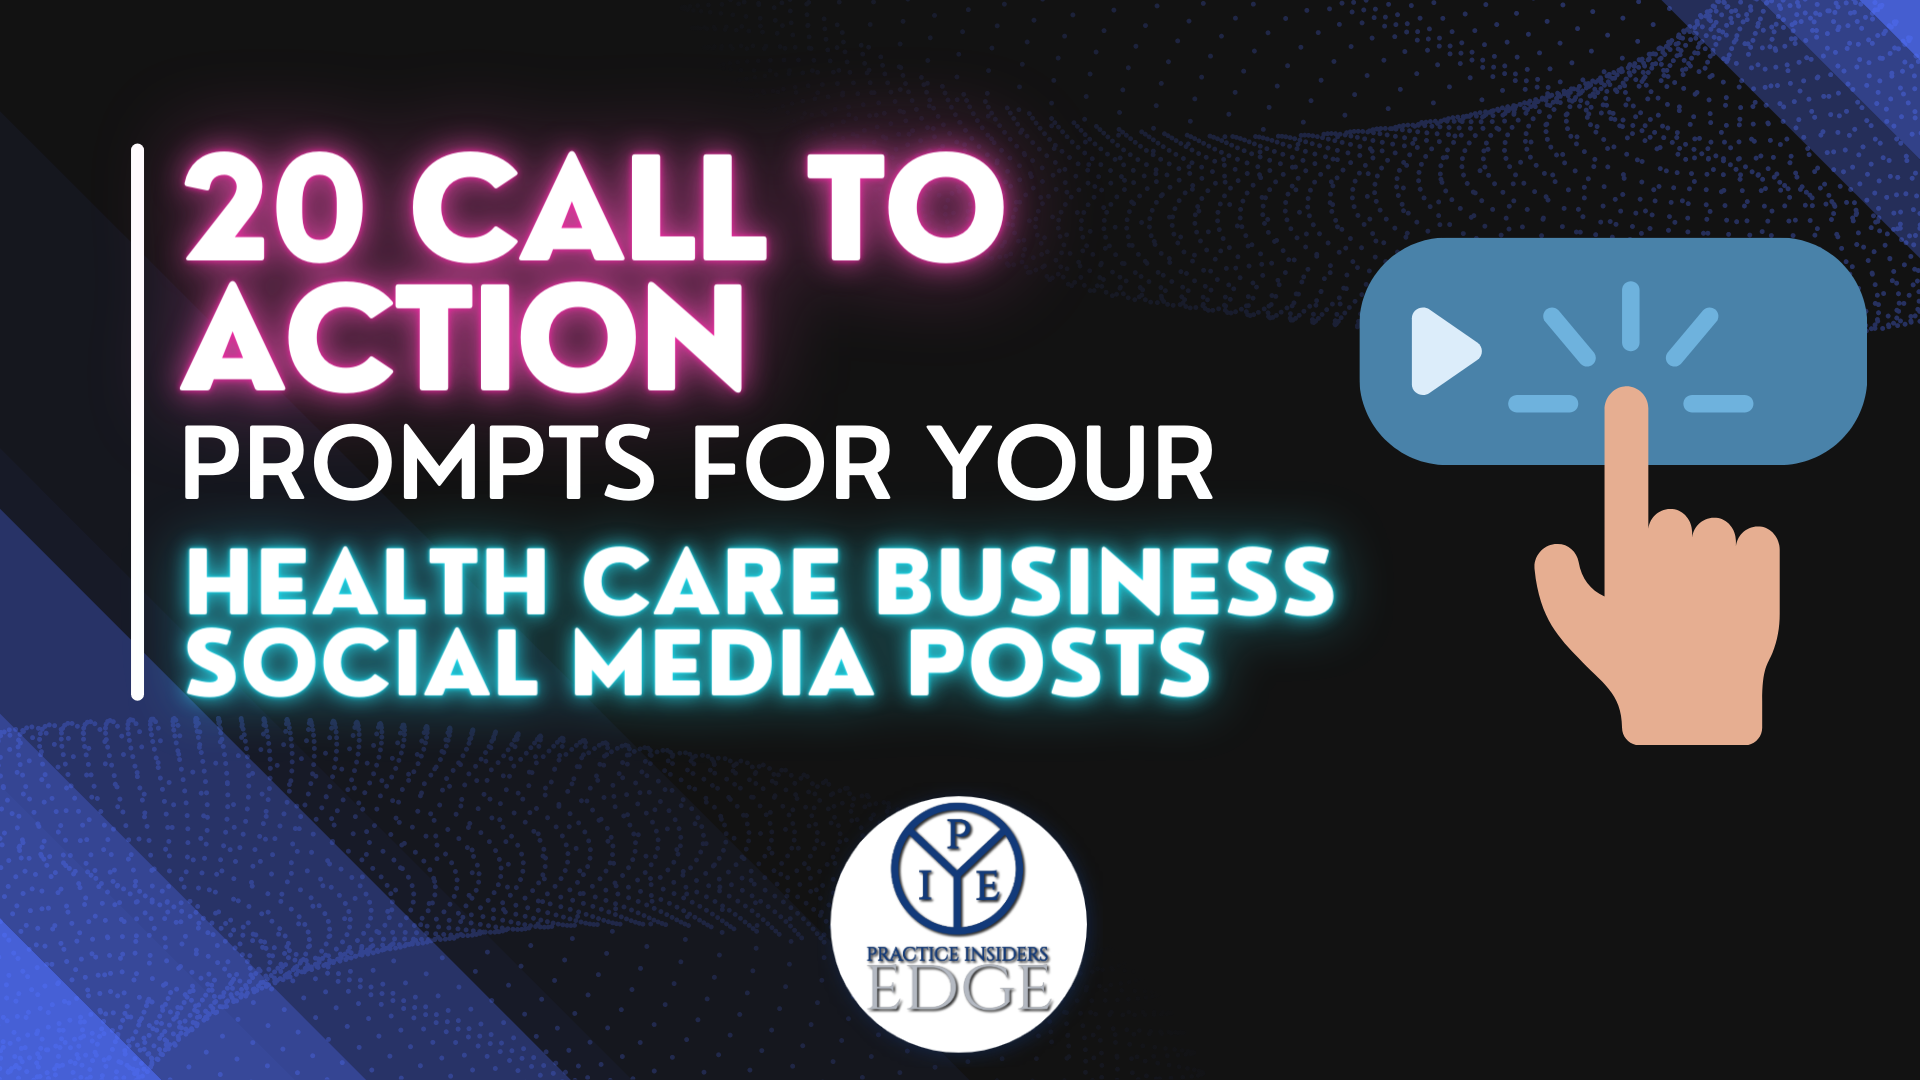 20 Call To Action Prompts For Your Practices Social Media Posts